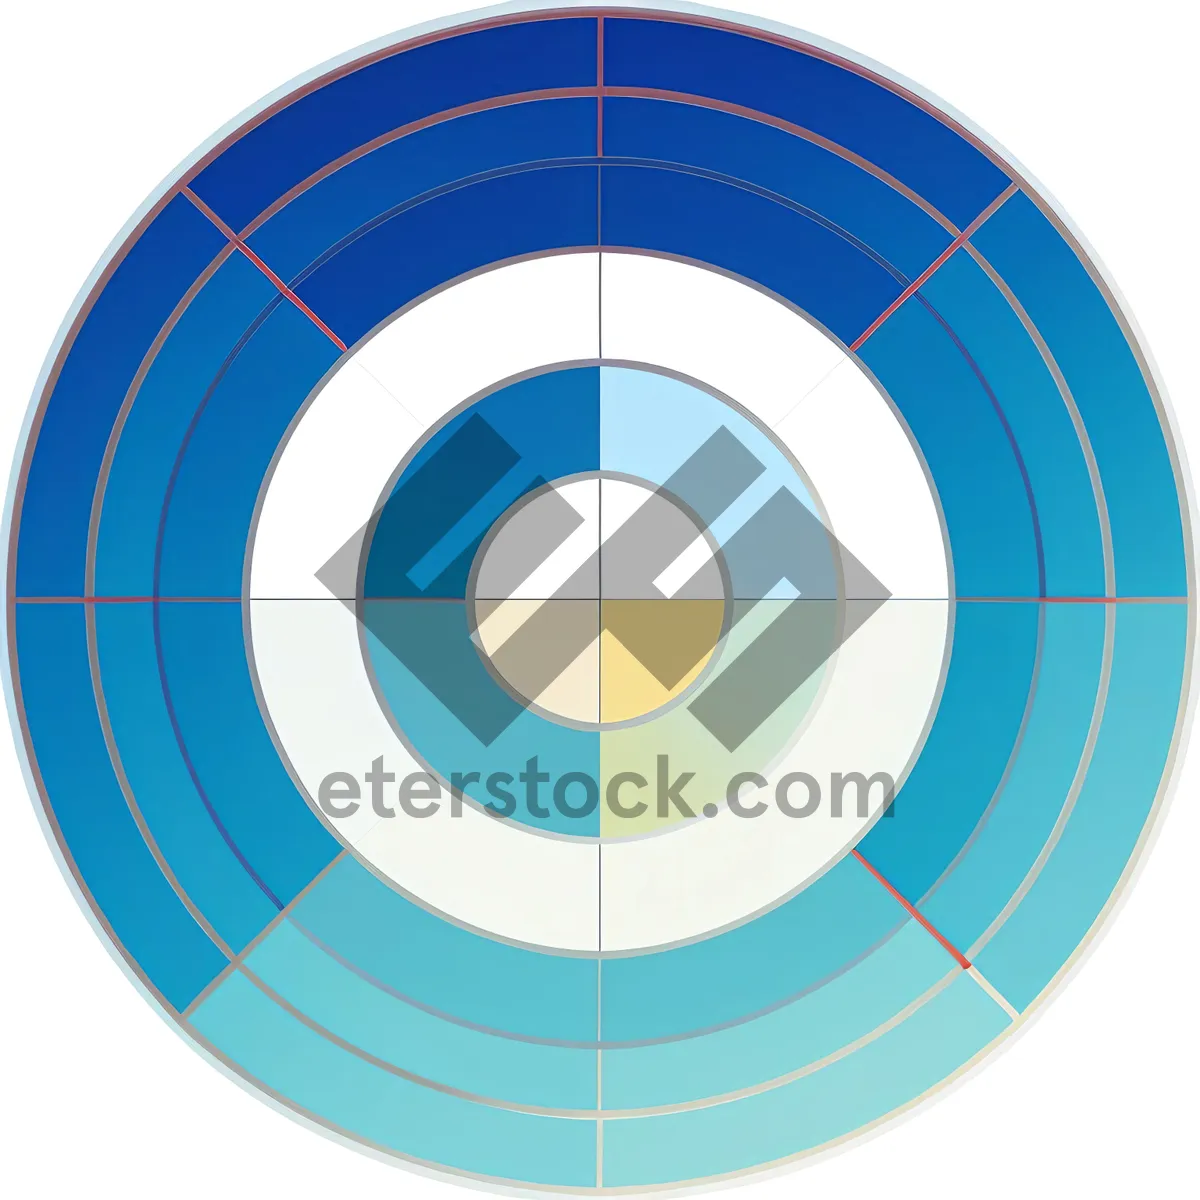 Picture of Round Web Button Icon: Glossy Grid Design